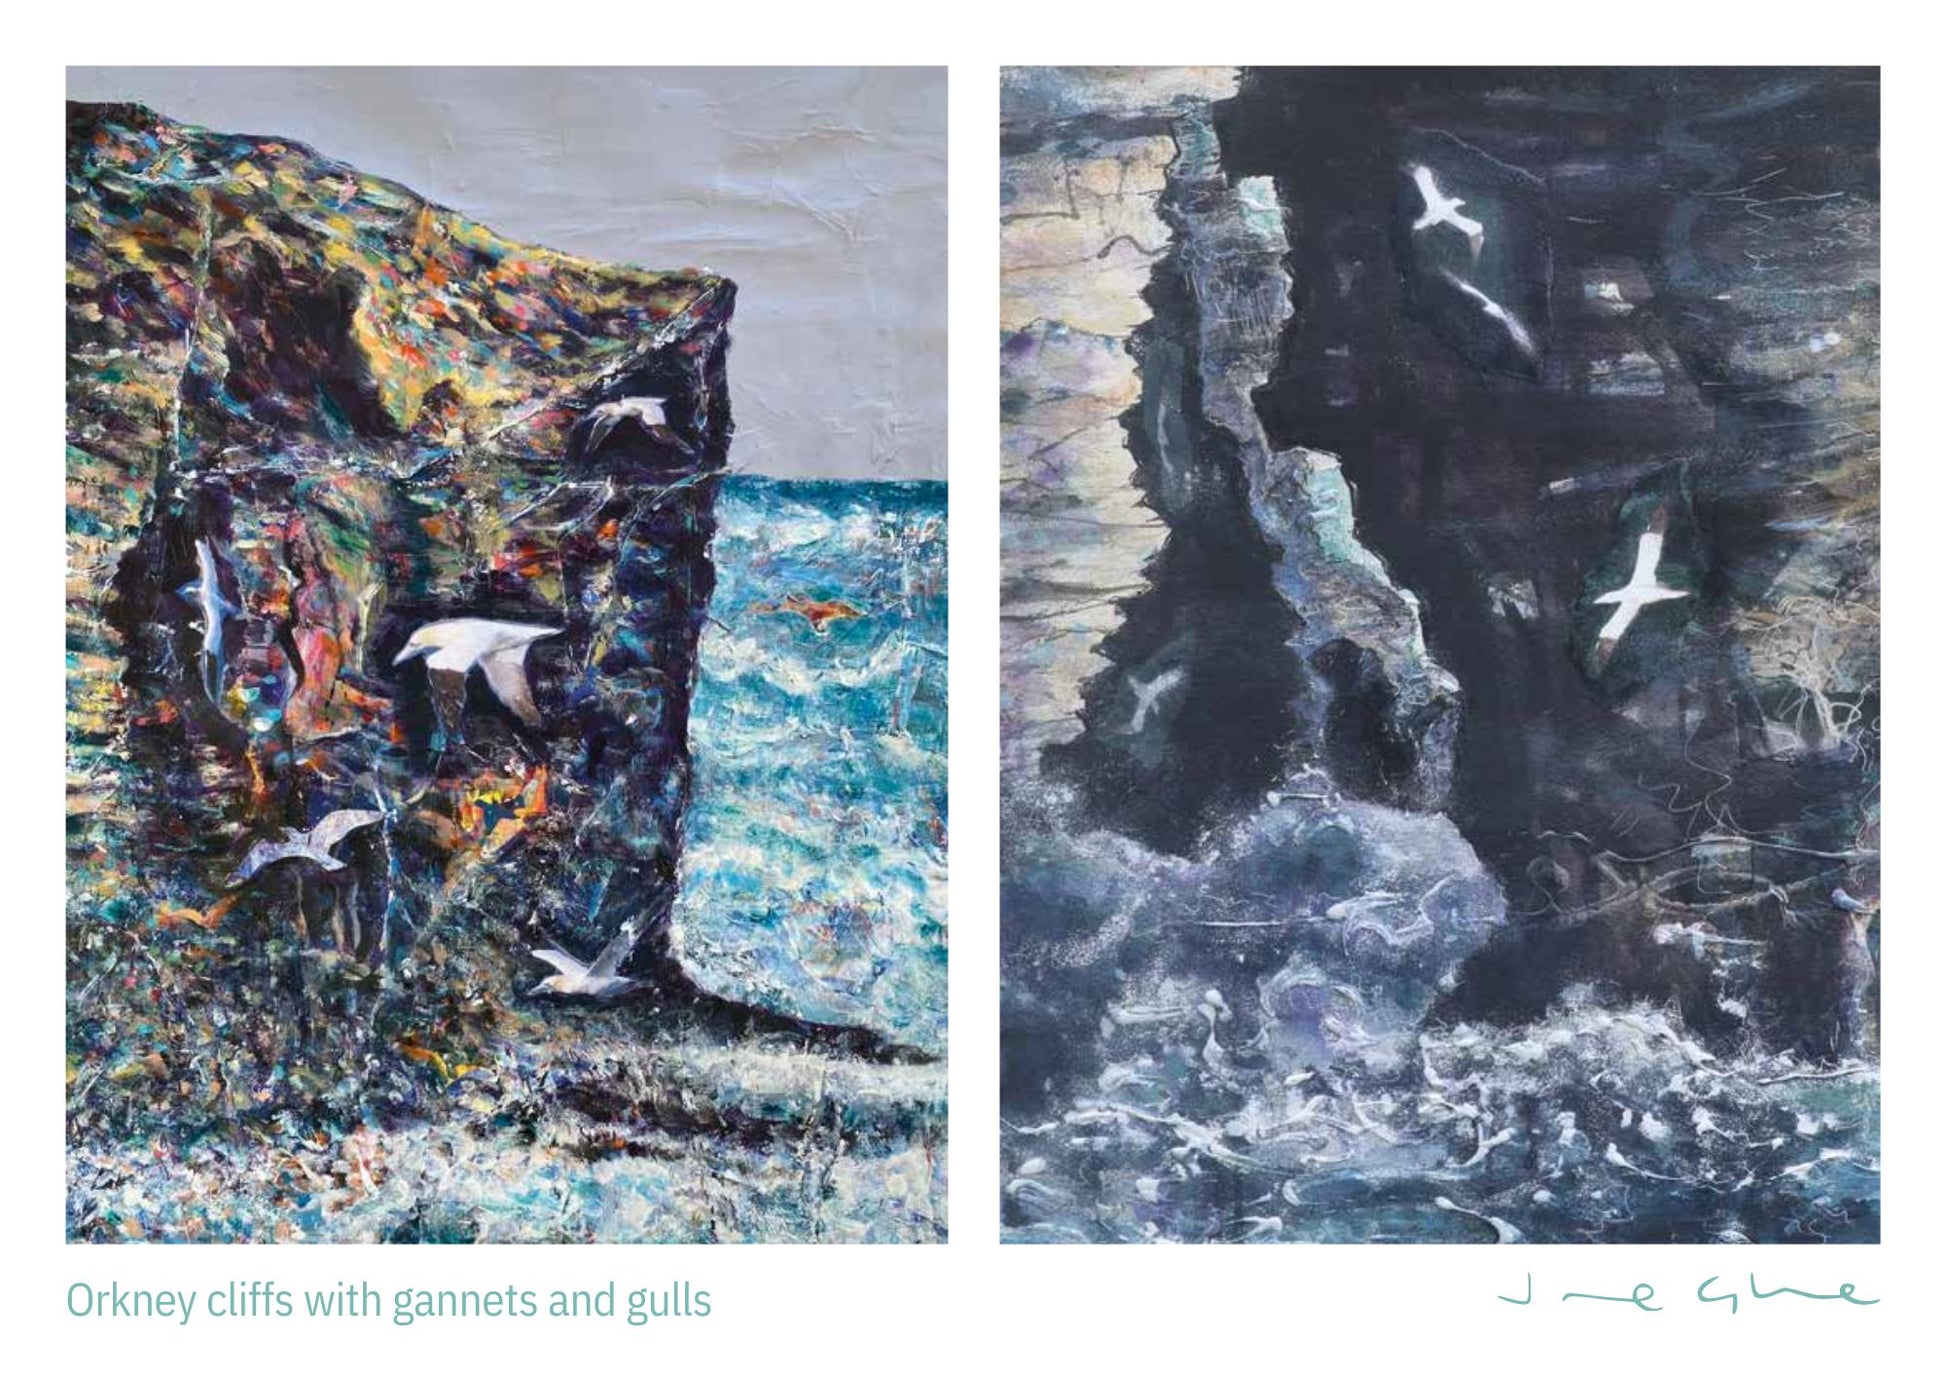 Orkney calendar 2025 january mixed media paintings of seabirds flying against cliffs by Orkney artist Jane Glue Scotland